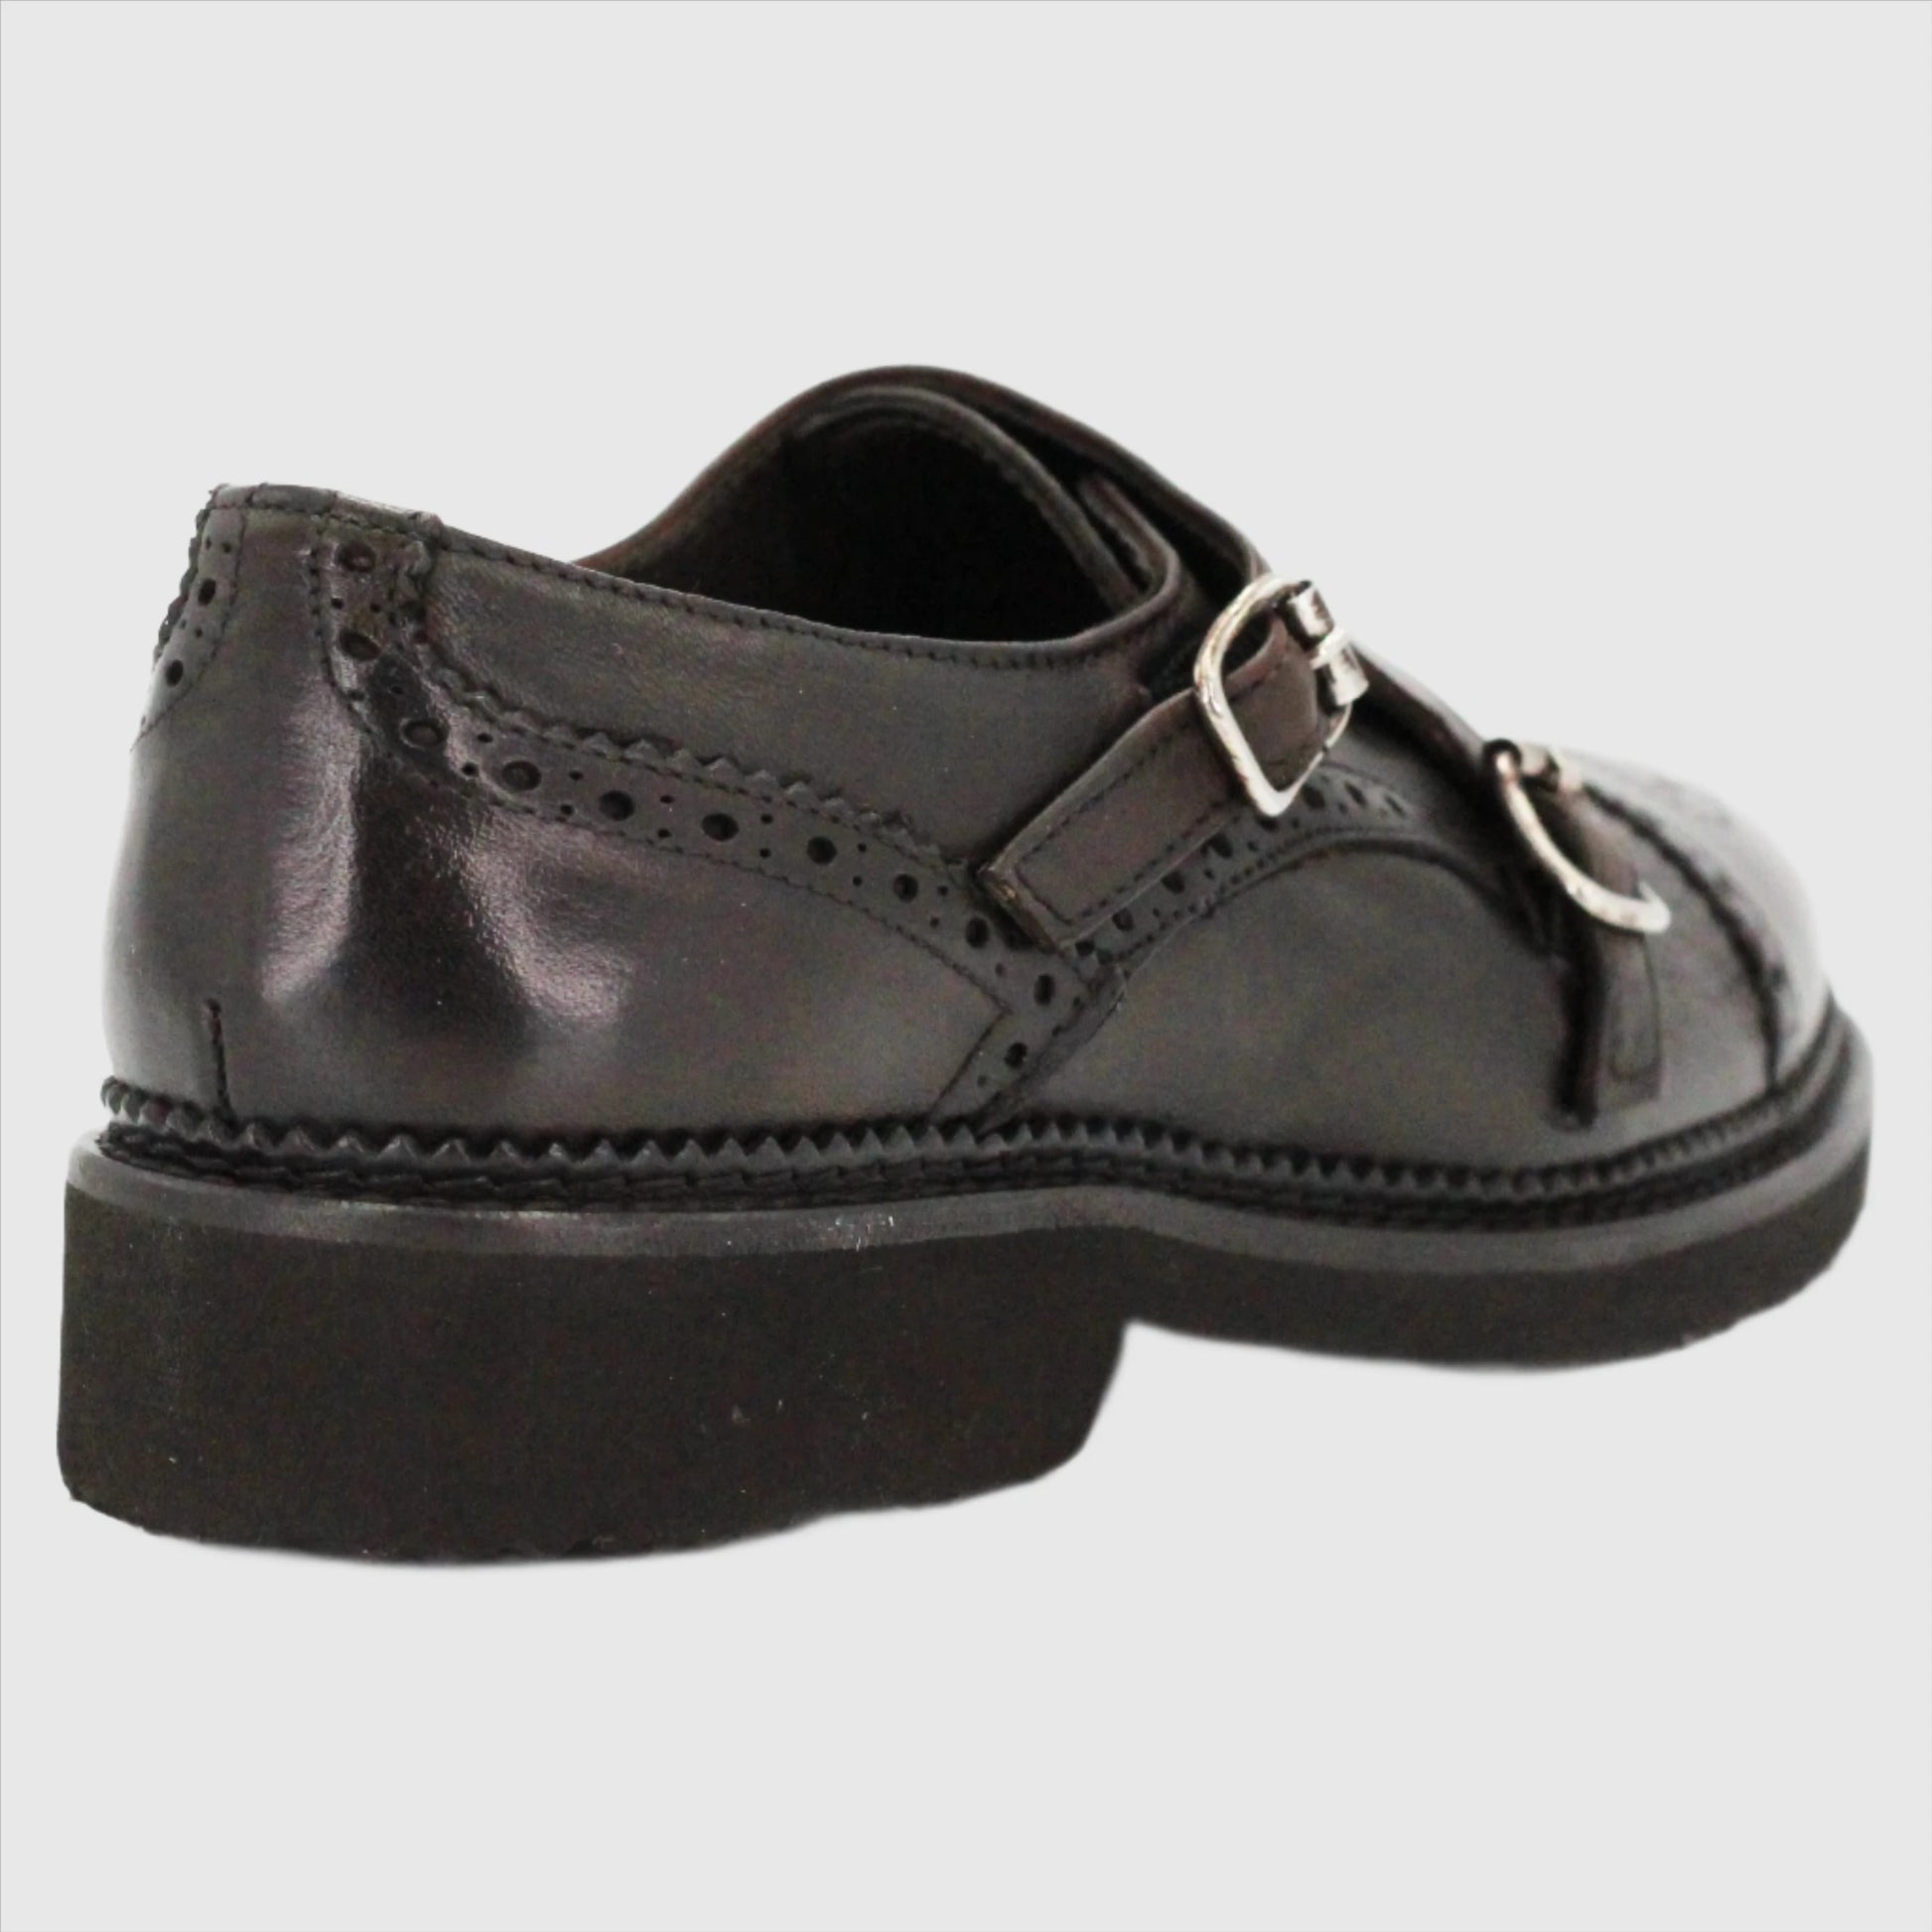 Shop Handmade Italian Leather Double Monk Moccasin in Testa Di Moro (GRD611/6) or browse our range of hand-made Italian shoes in leather or suede in-store at Aliverti Cape Town, or shop online. We deliver in South Africa & offer multiple payment plans as well as accept multiple safe & secure payment methods.